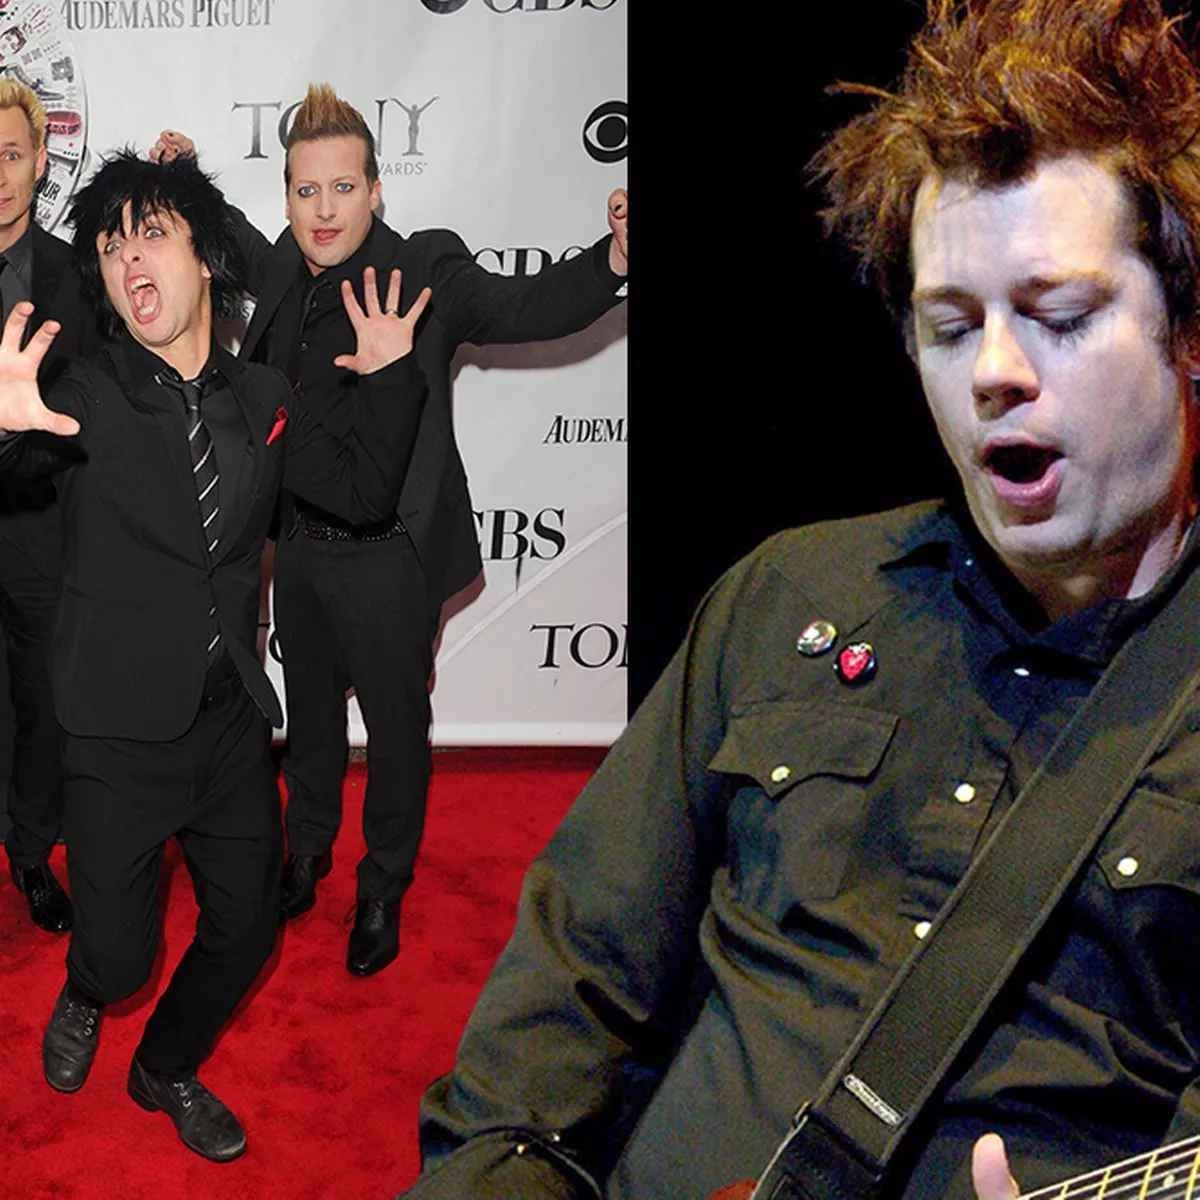 Who Is the Lead Singer of Green Day